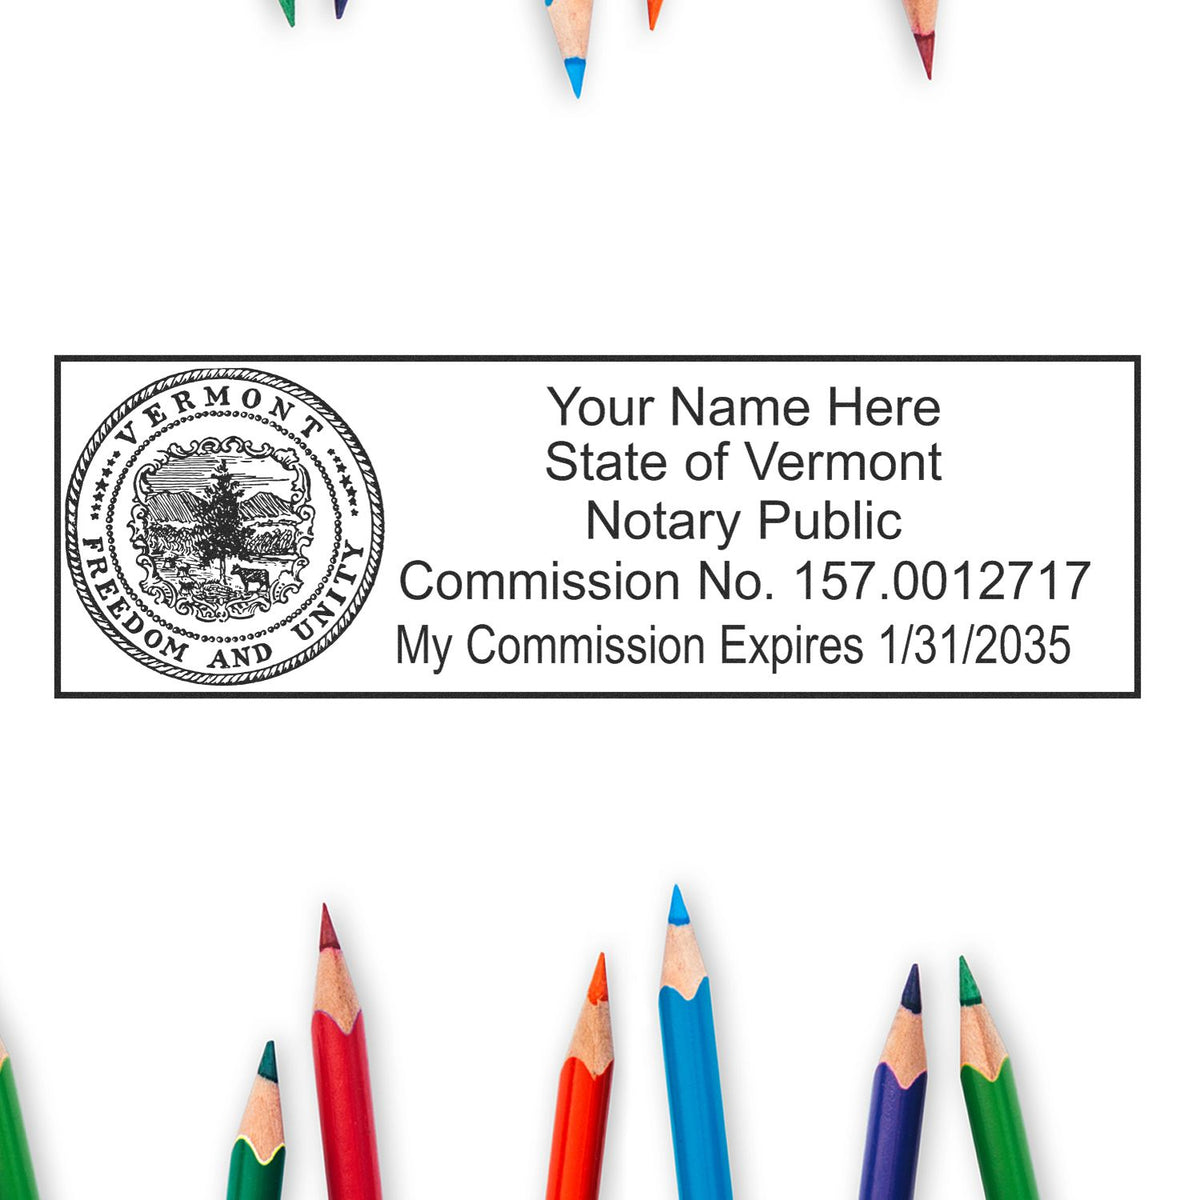 This paper is stamped with a sample imprint of the Super Slim Vermont Notary Public Stamp, signifying its quality and reliability.